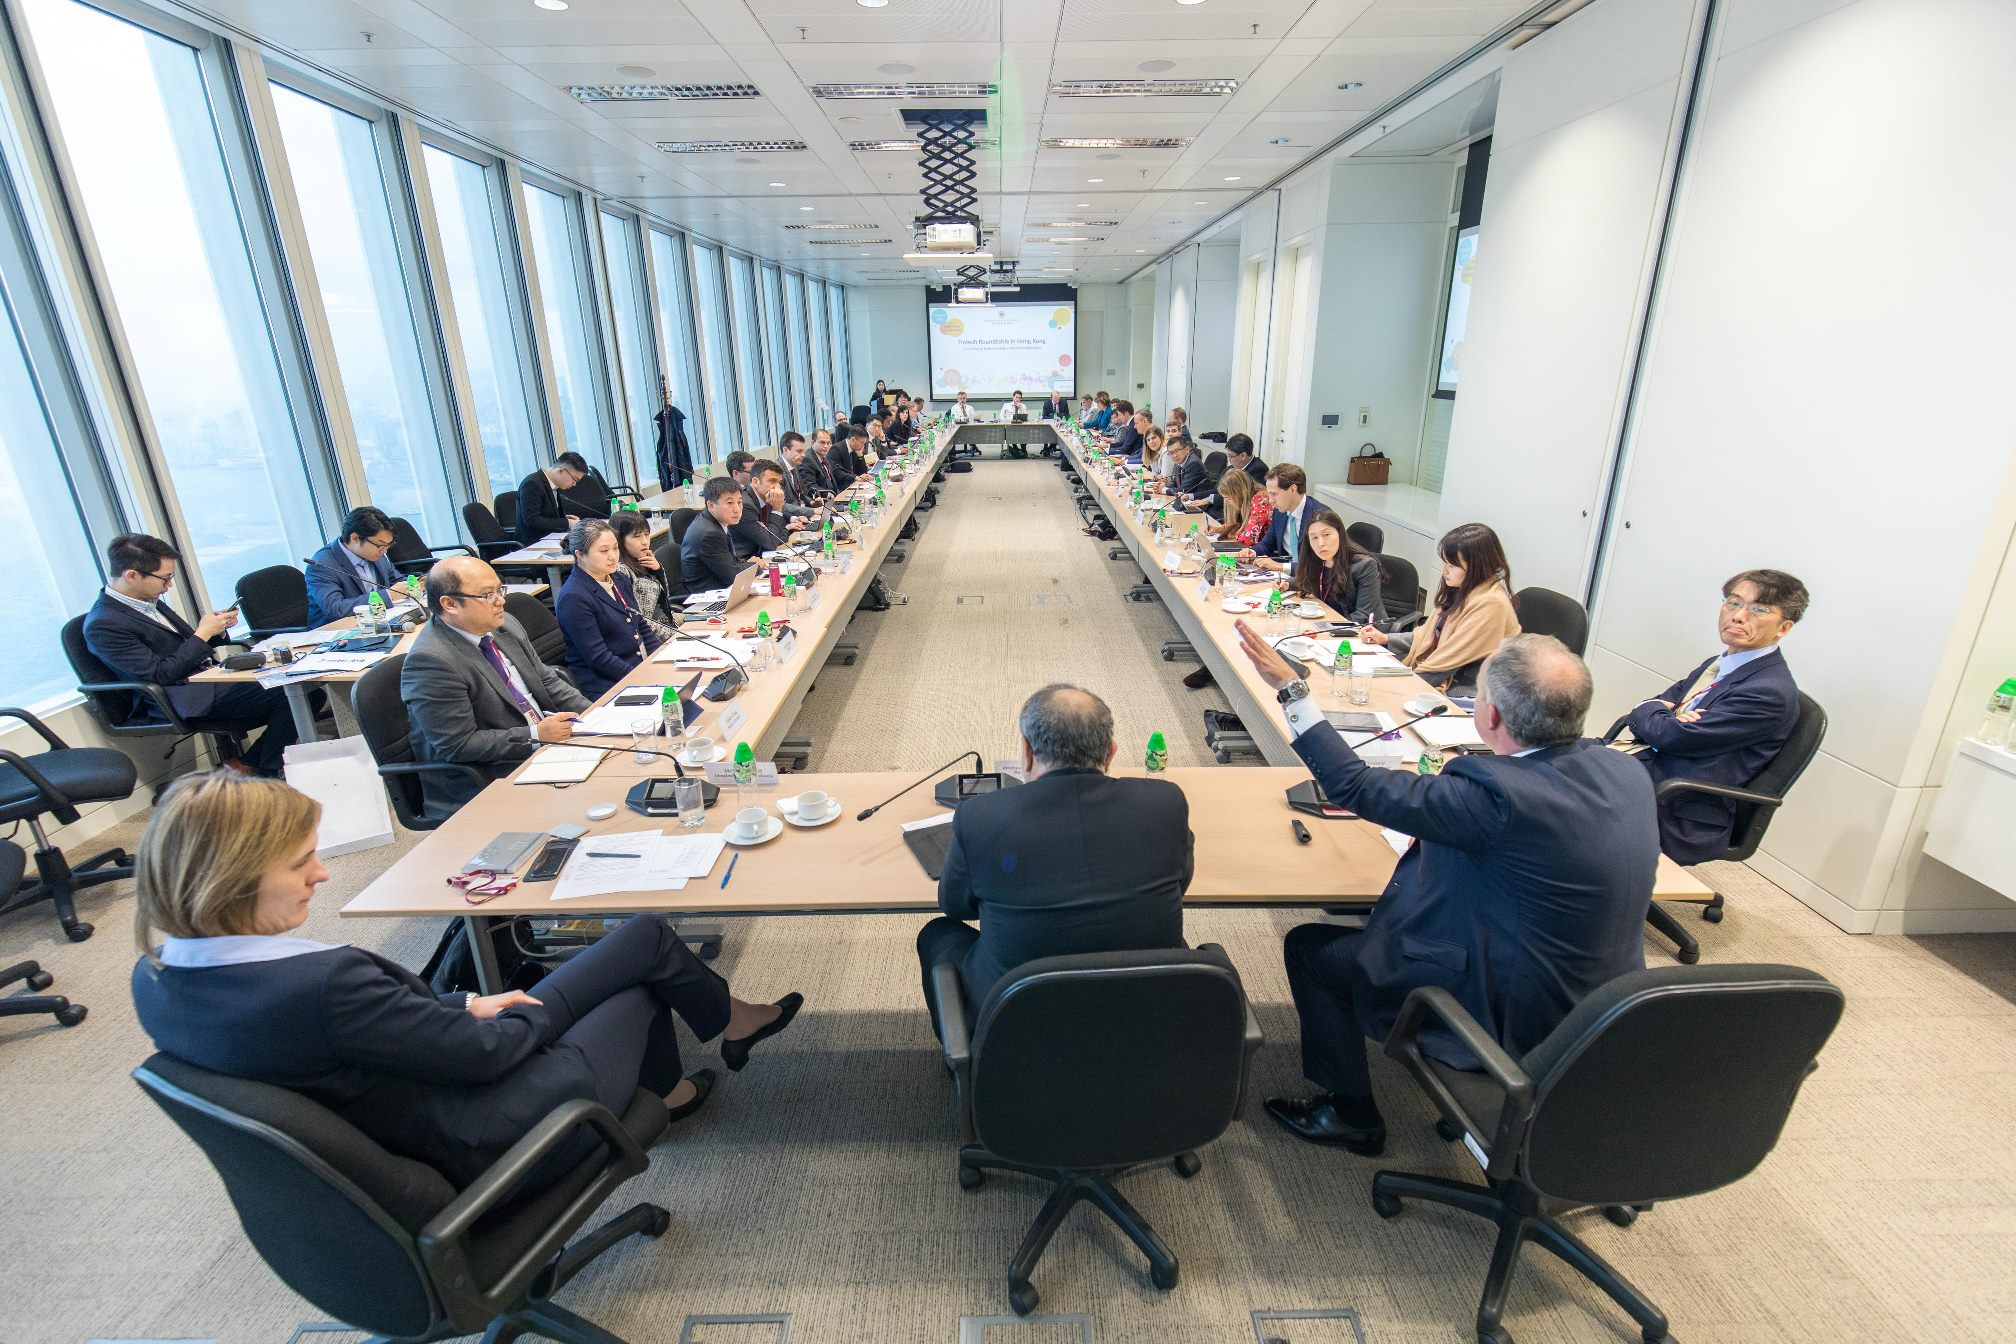 About 45 senior representatives attend the Fintech Roundtable.